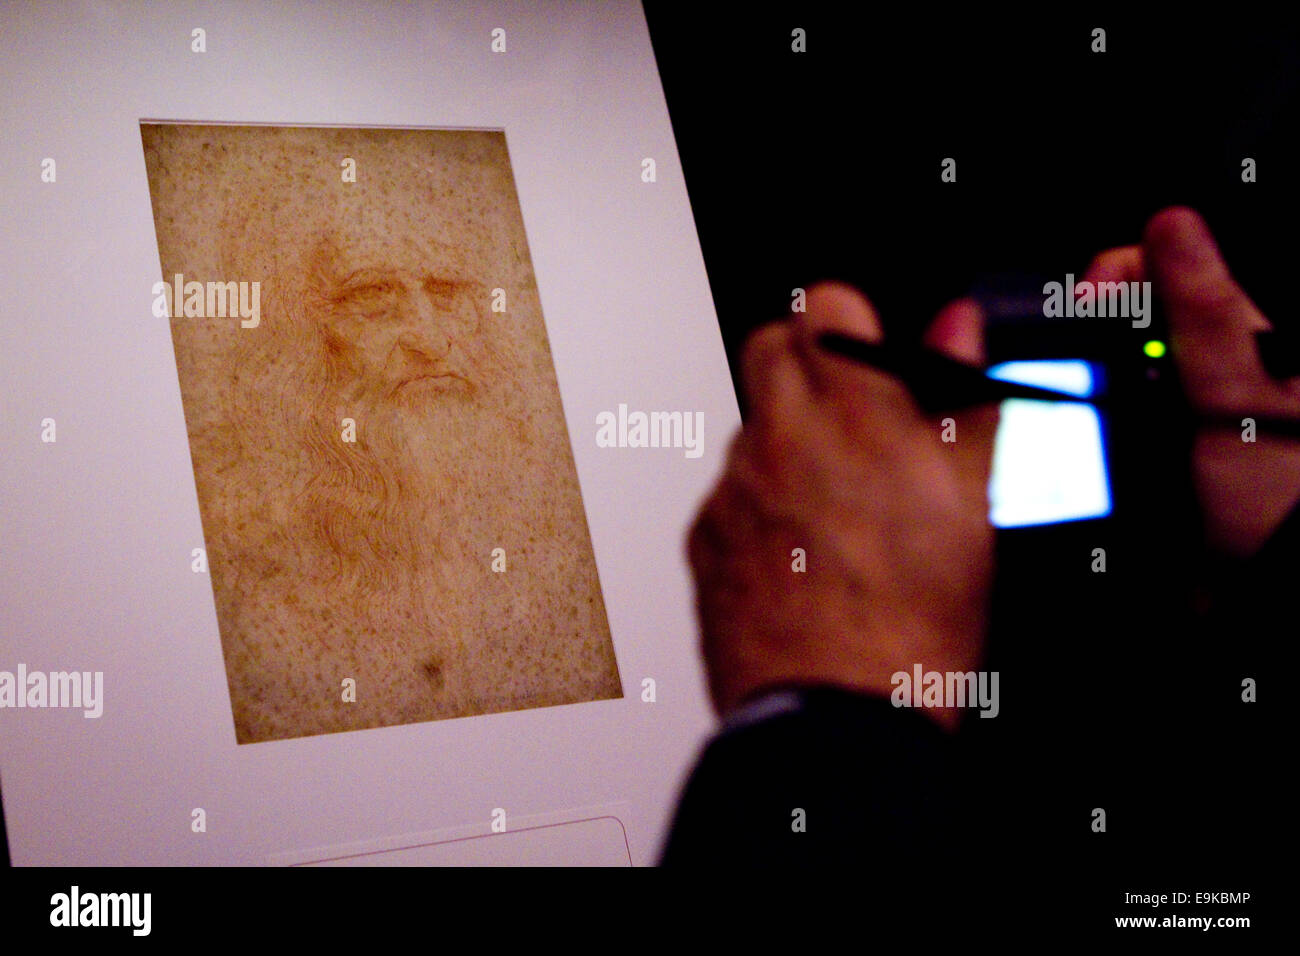 Torino, Italy. 28th October 2014. Torino, Italy. 28th October 2014. A visitor takes a picure of Leonardo da Vinci self portrait (portrait of a man in red chalk).  An exhibition of Leonardo and other artist drawings opens in the vaults of the Royal Library of Torino, Italy. Stock Photo